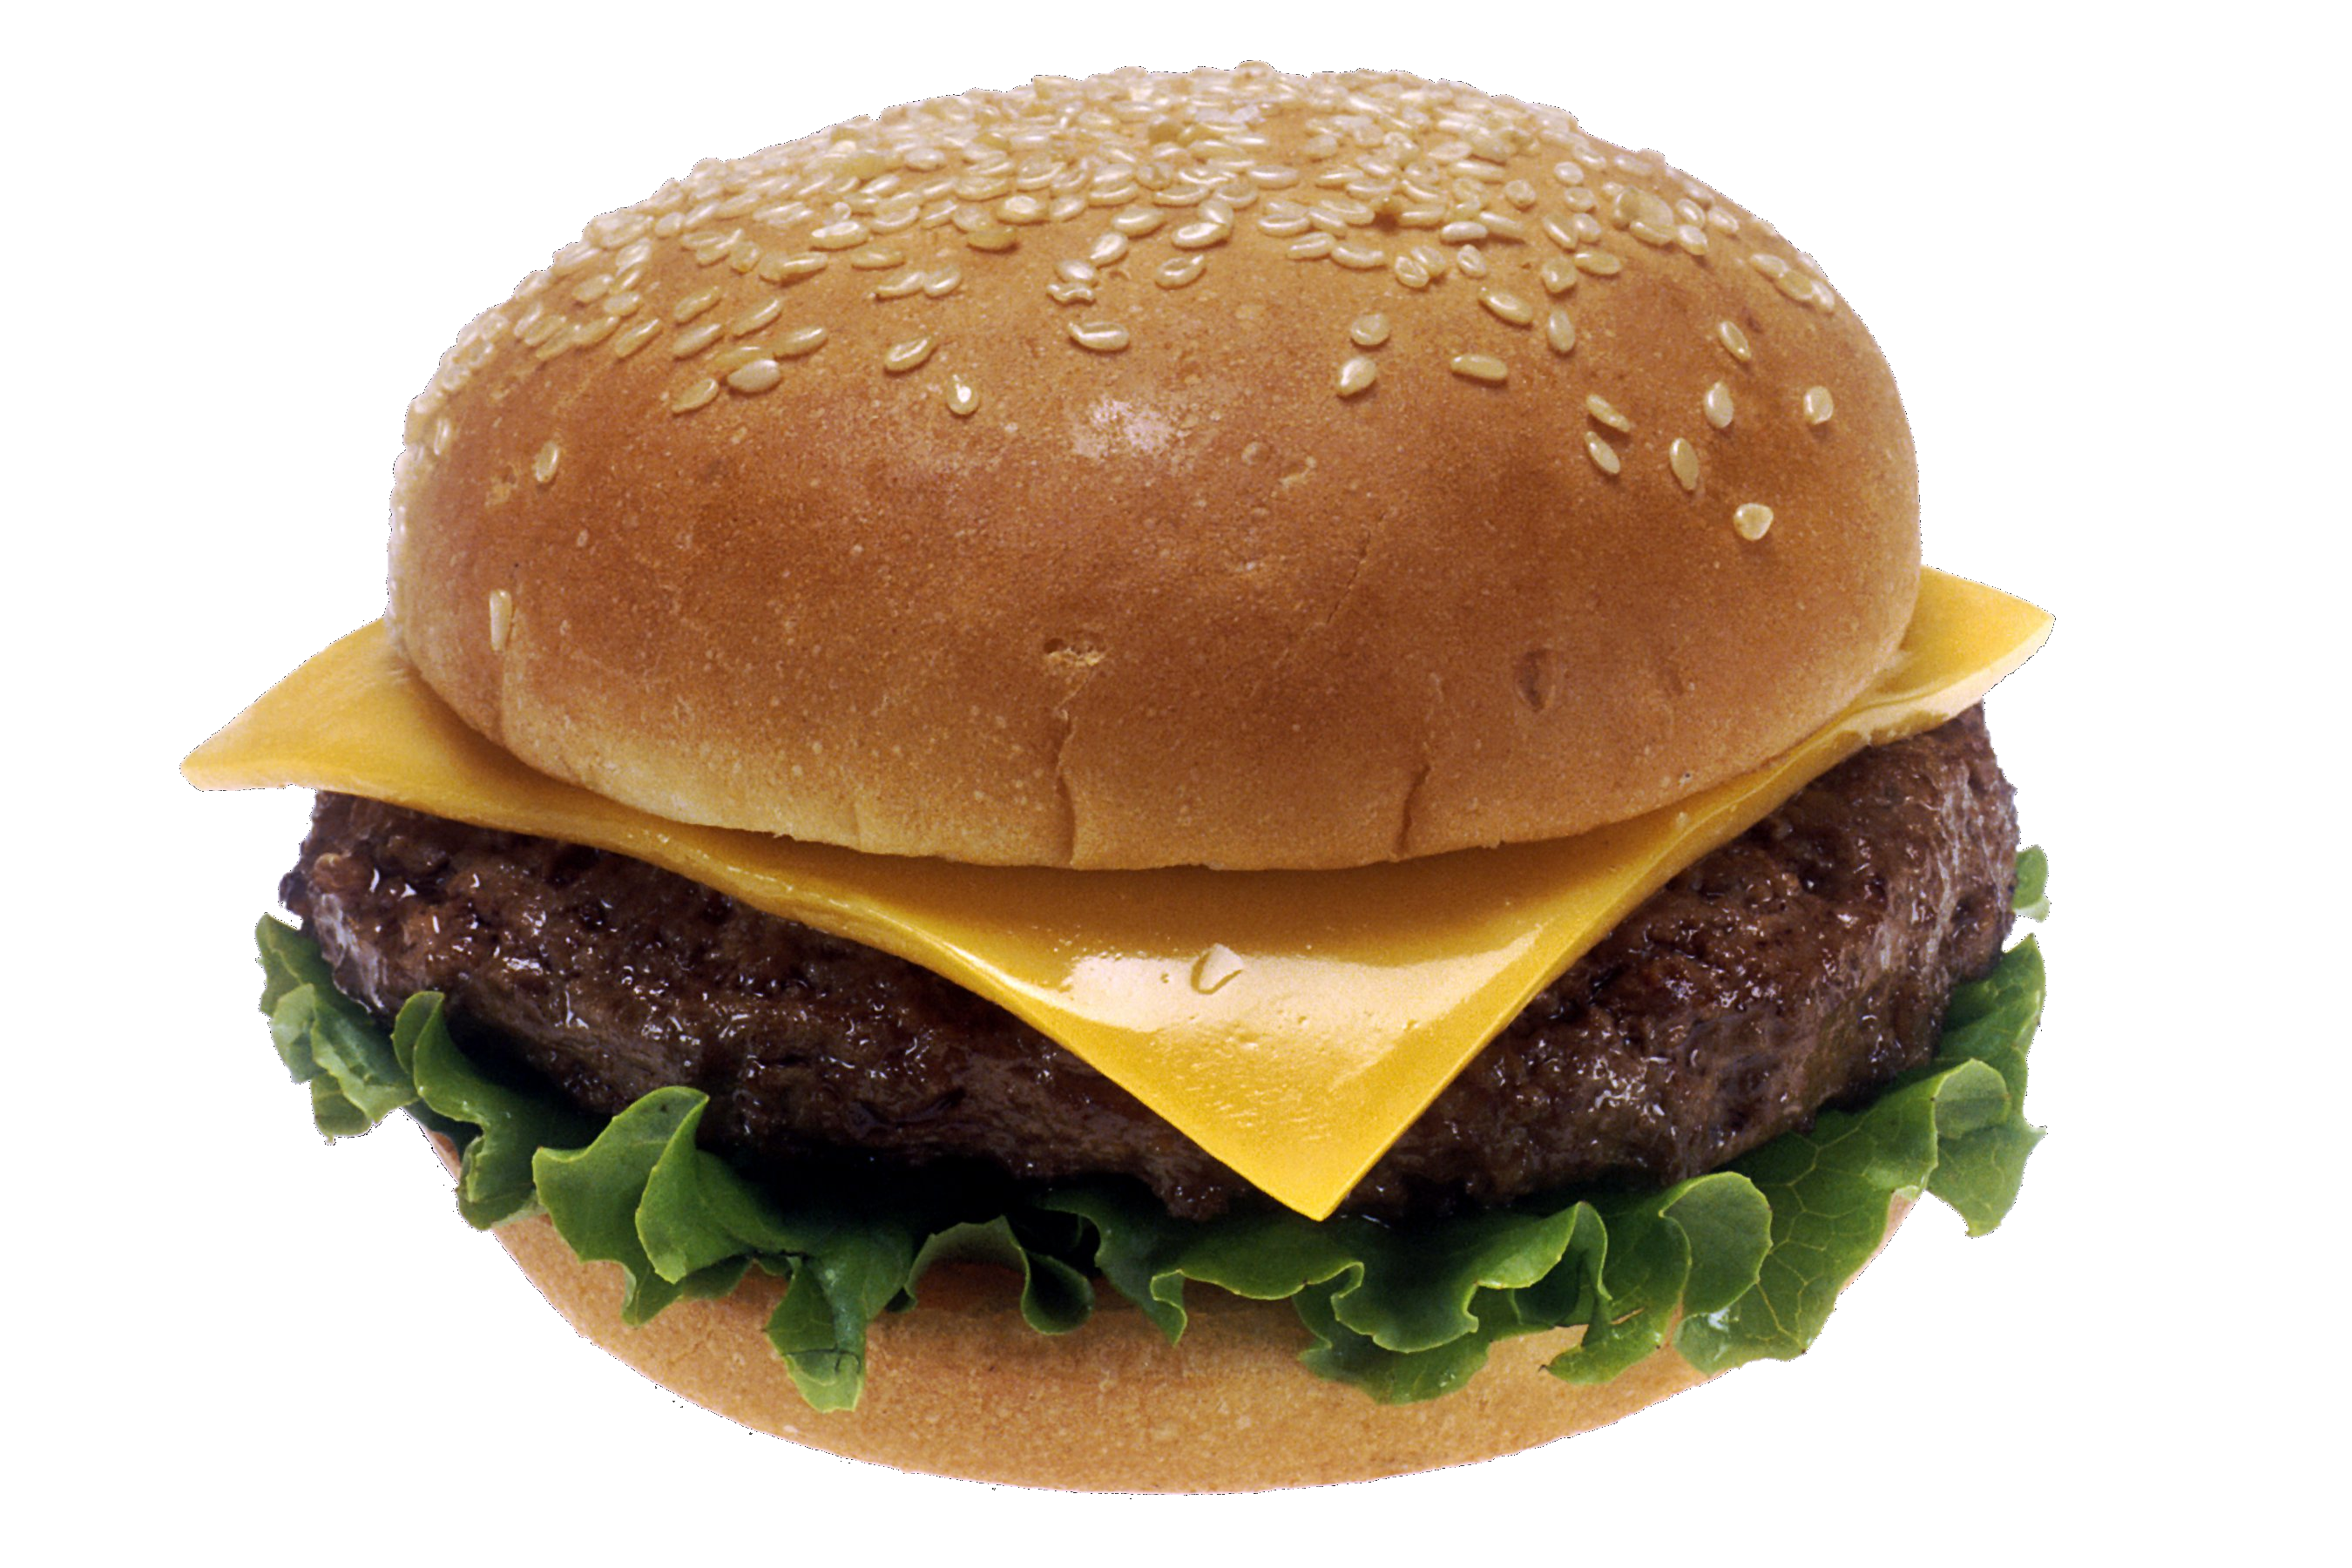 File:Cheeseburger.png - Wikimedia Commons